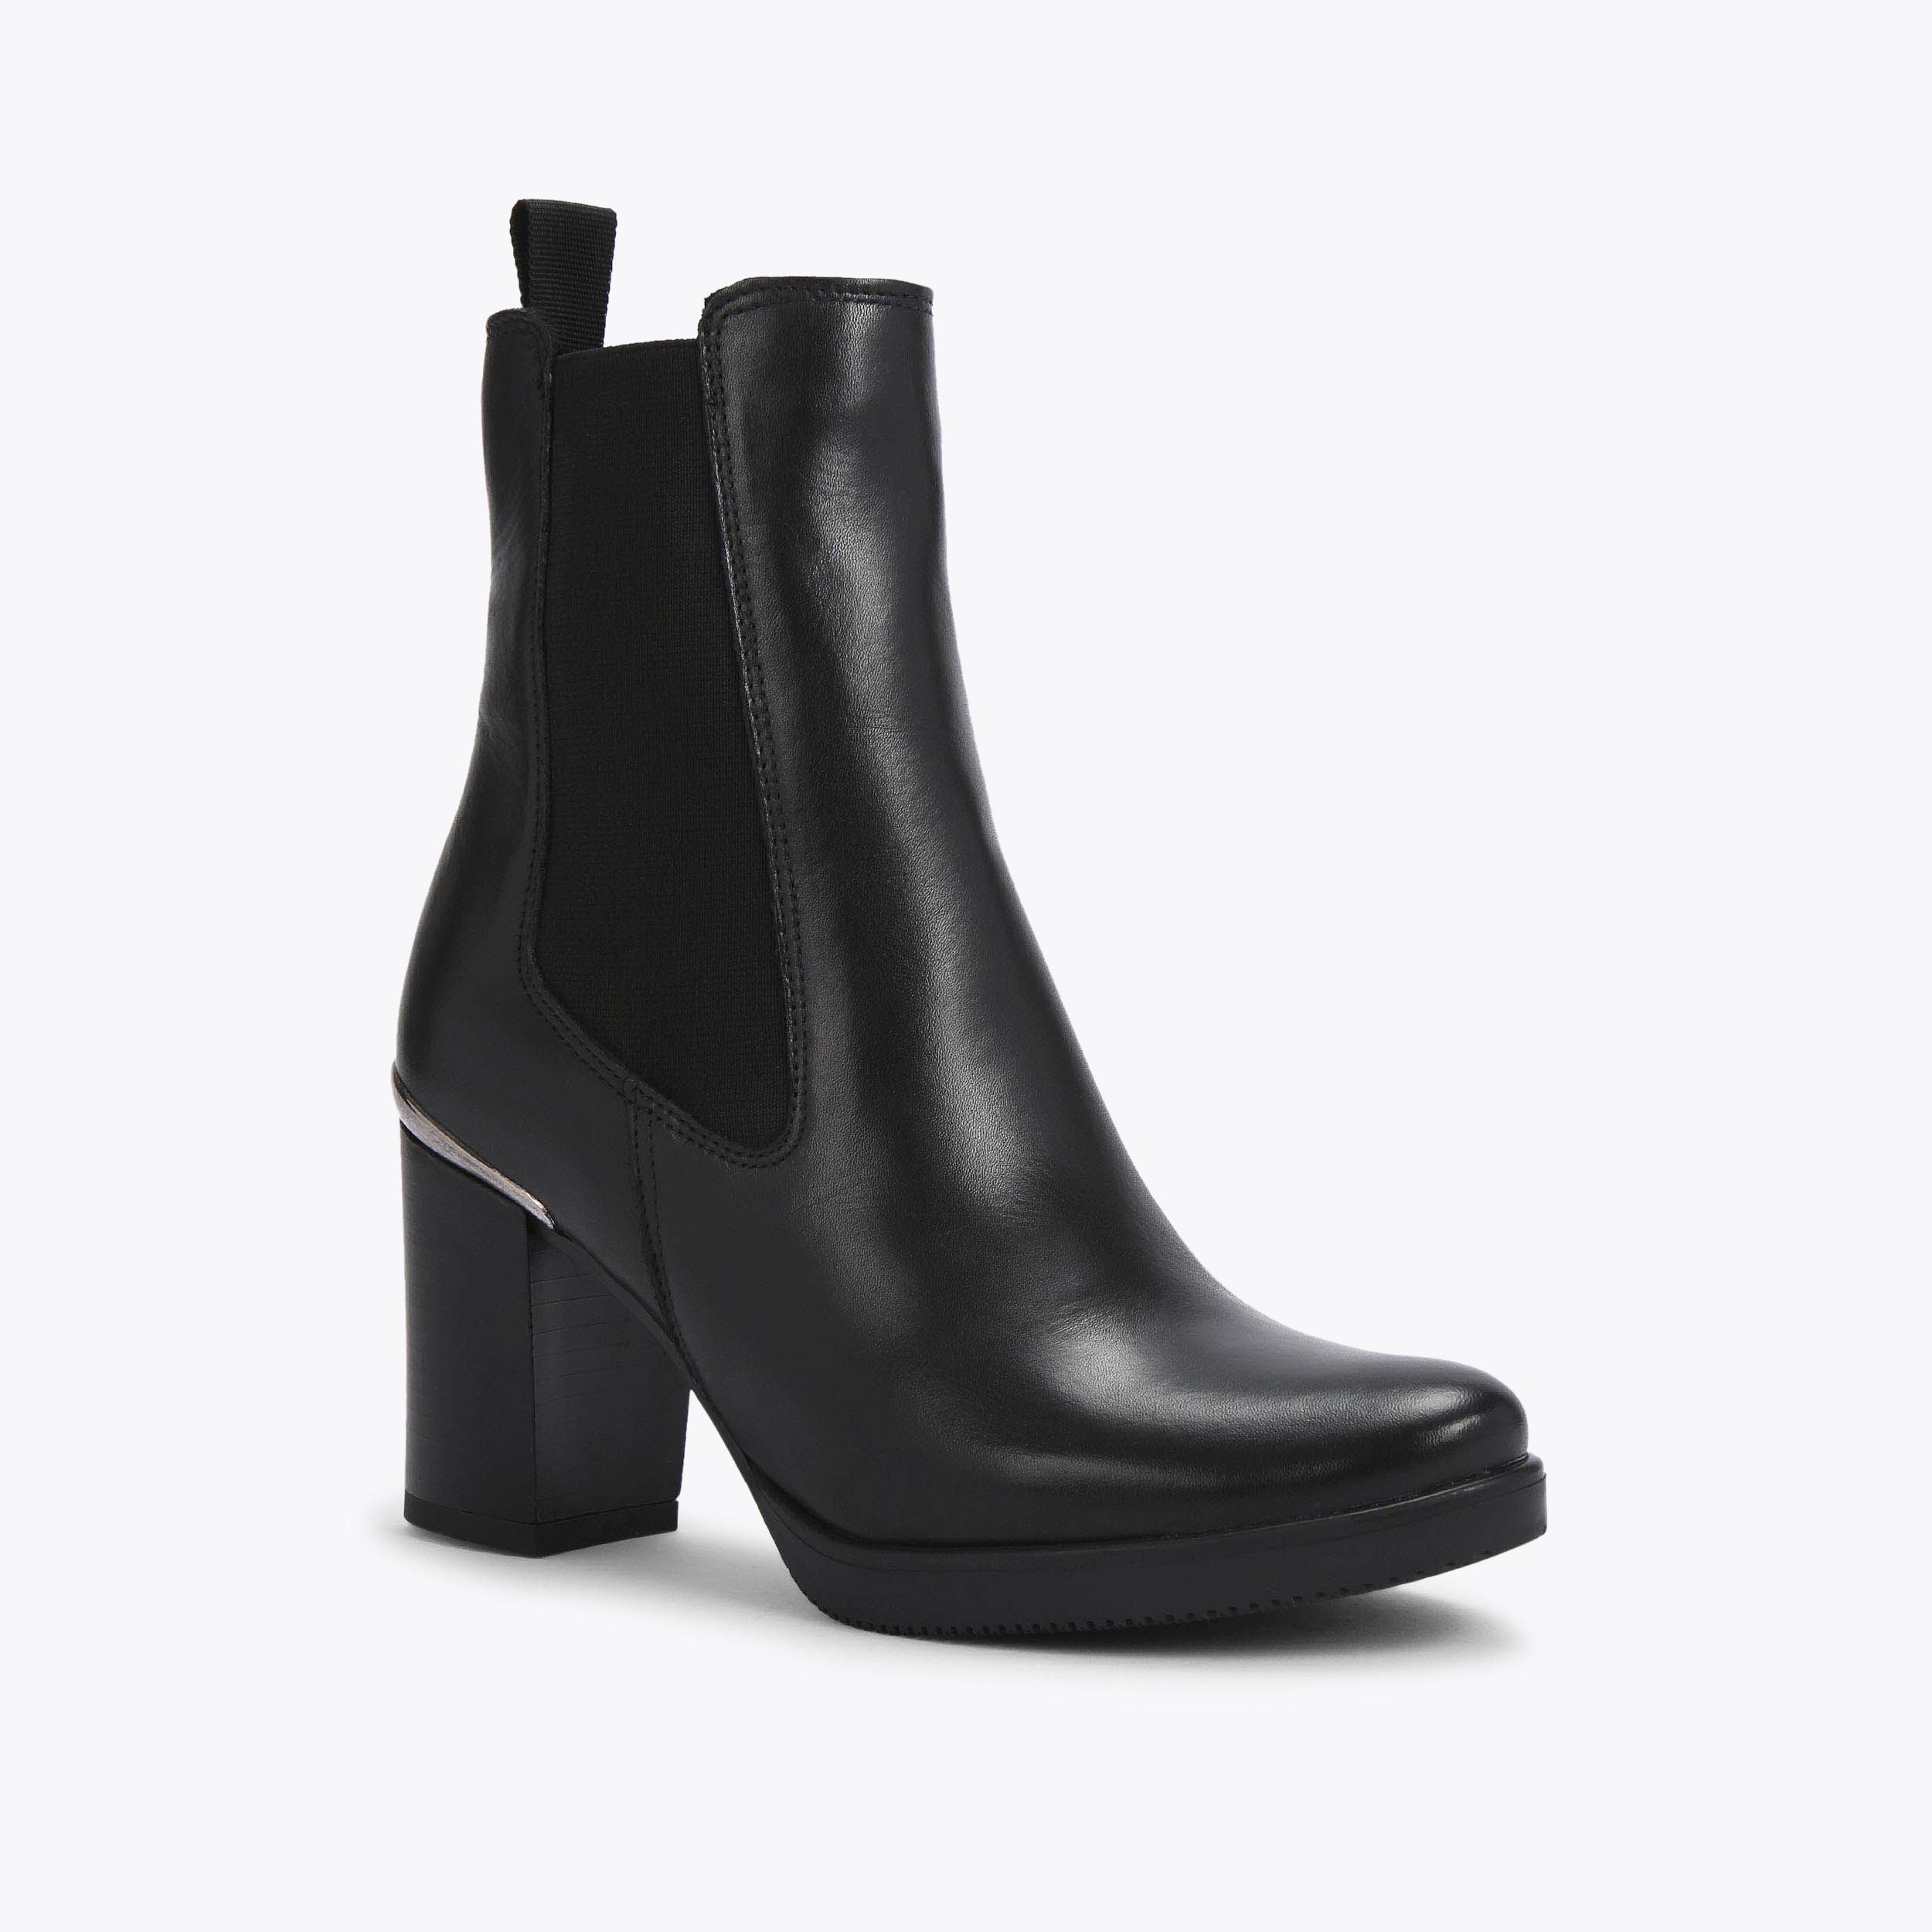 REACH ANKLE BOOT Black Leather Heeled Boots by CARVELA COMFORT